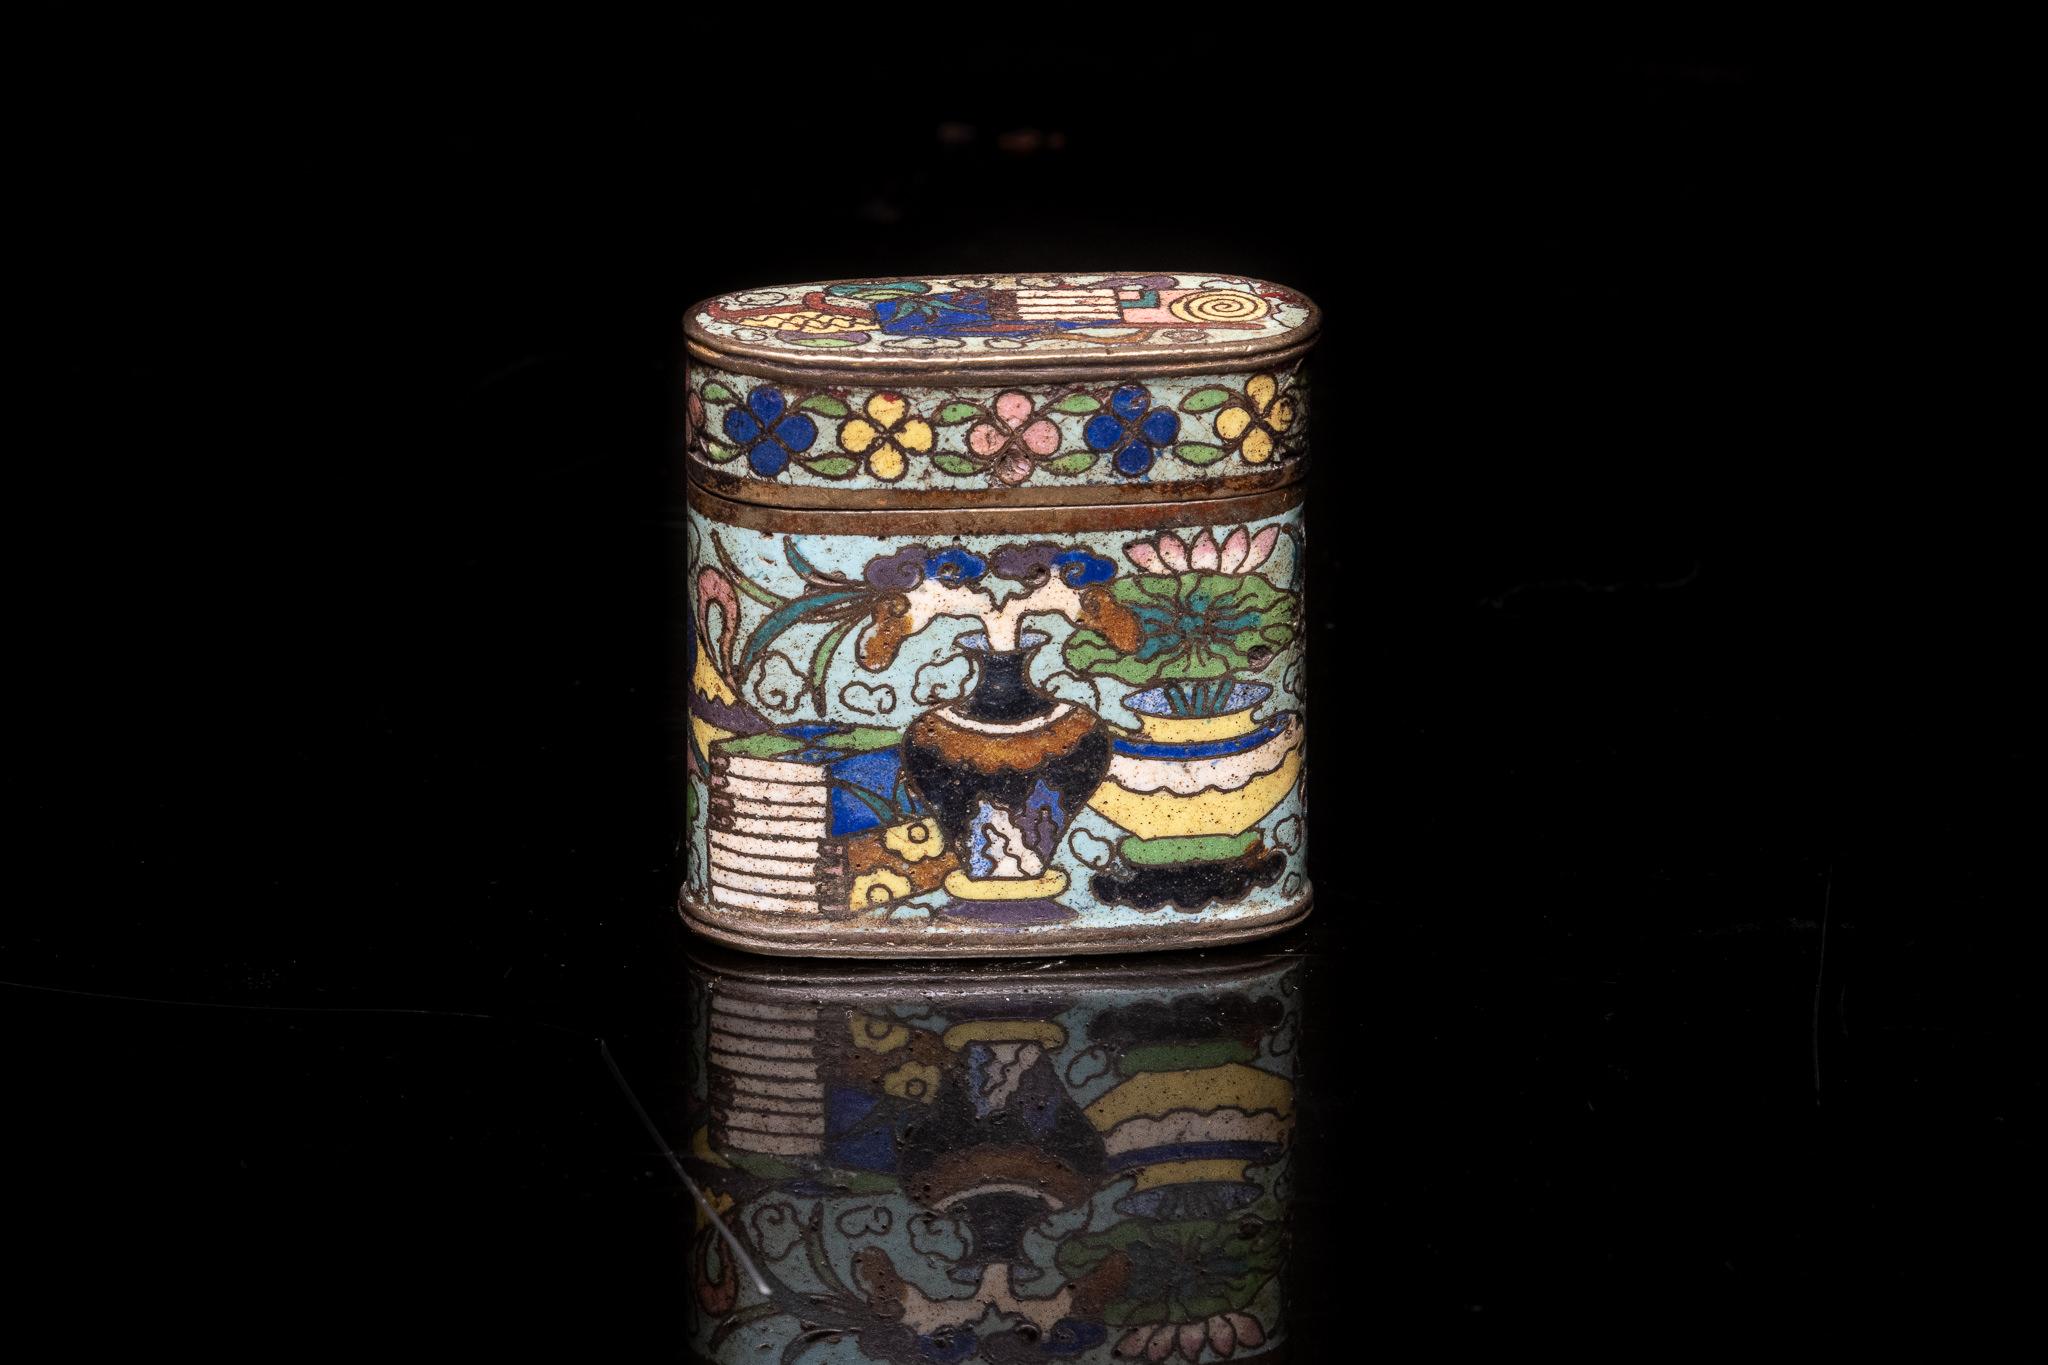 Antique Chinese Opium Box in Cloisonné Enamel, decorated with Floral Motifs and Interior Scenes

French Private Collection